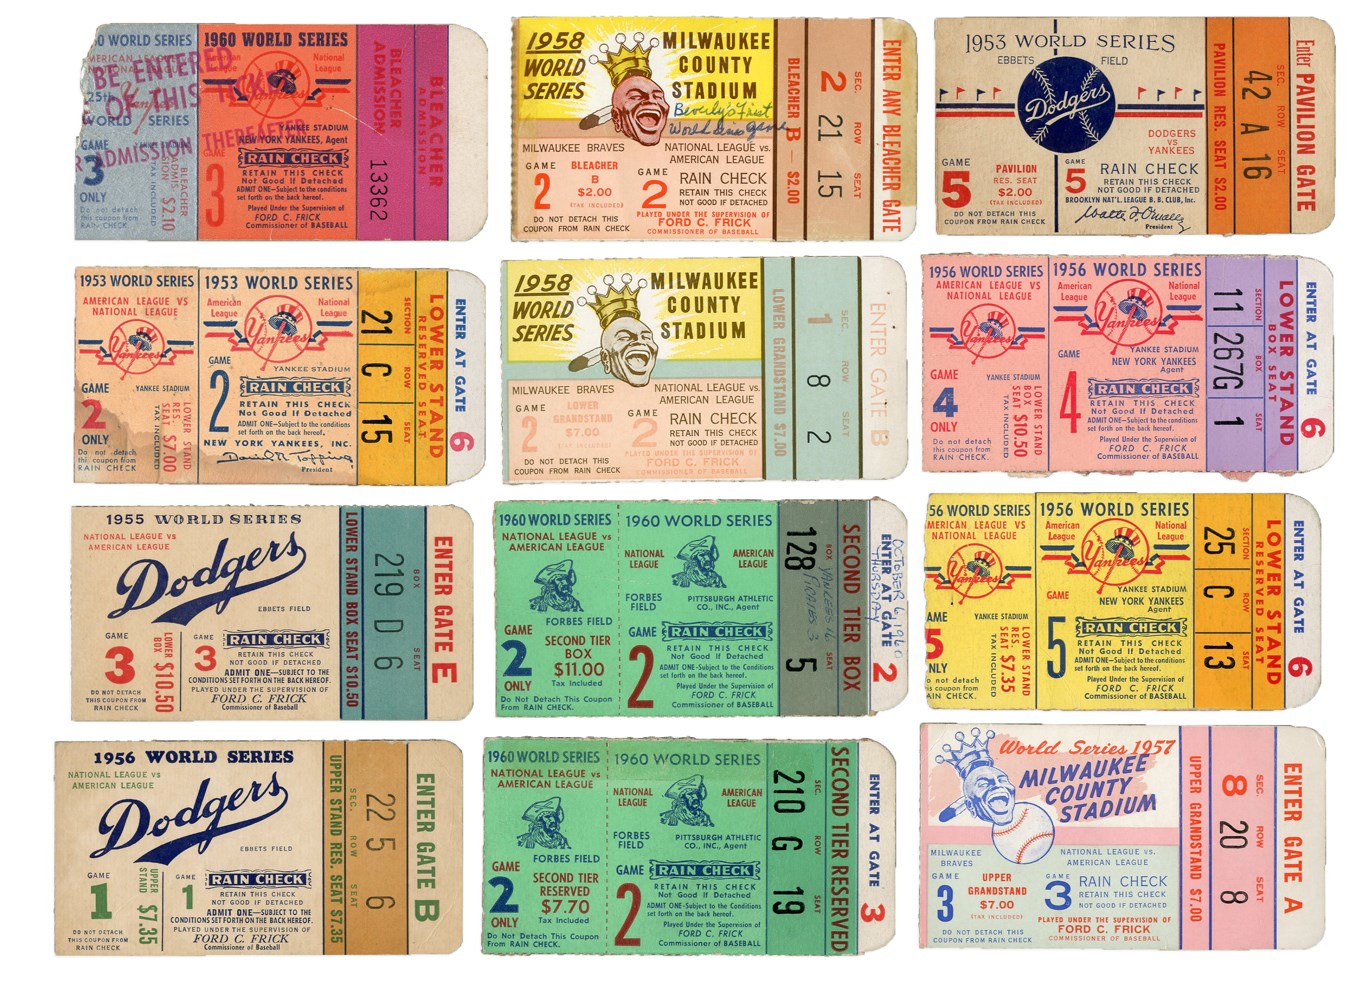 Mantle and Maris - Complete Set of Mickey Mantle World Series Record-Setting Home Run Tickets (18)